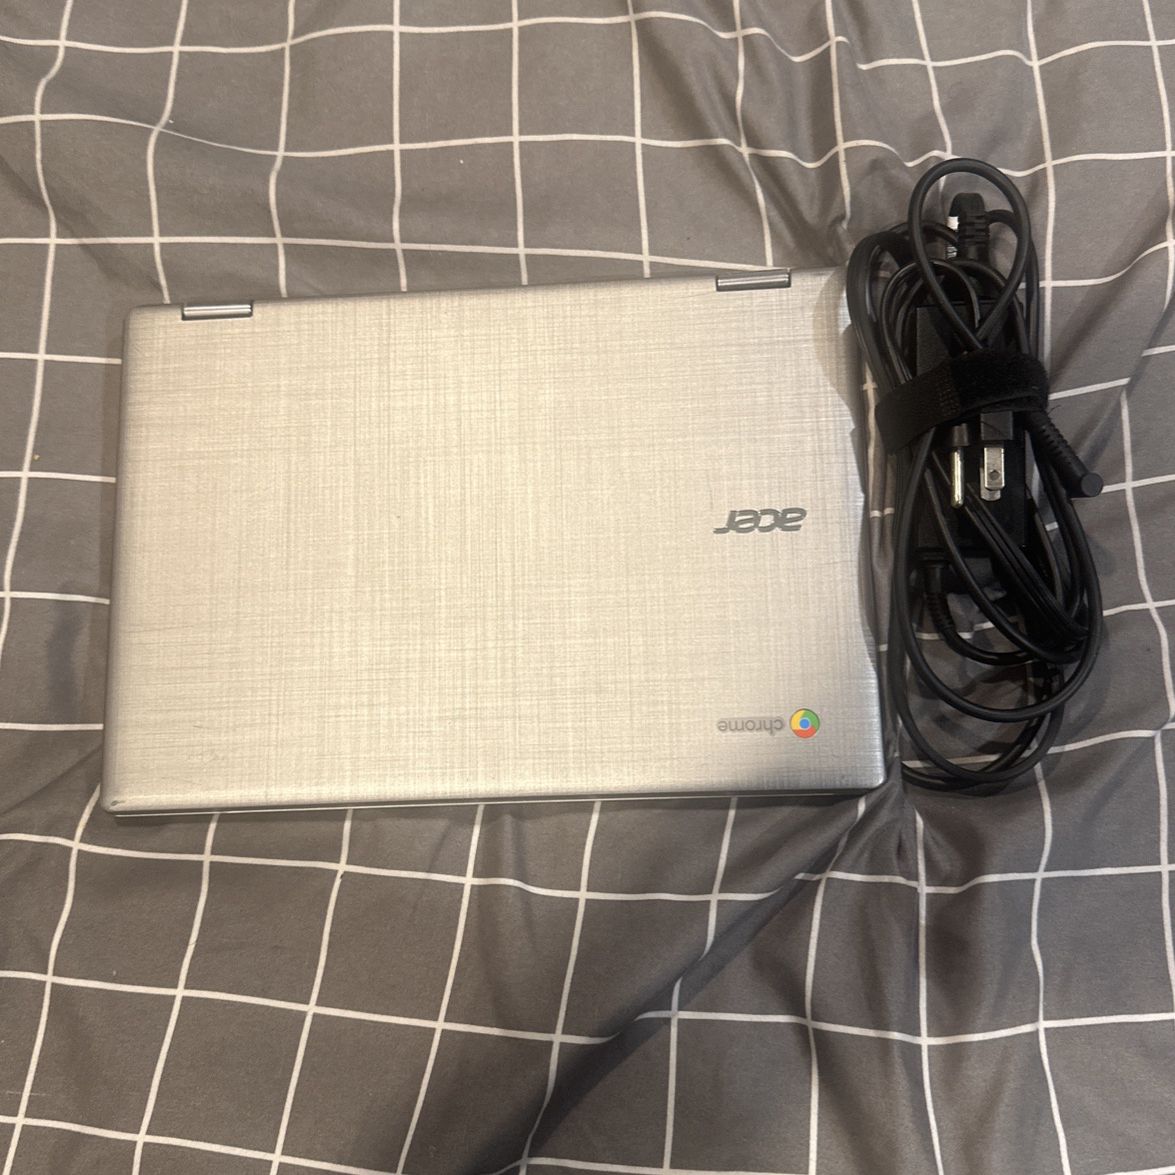 After Chromebook Cp311 Series For Sale Price Definitely Negotiable 